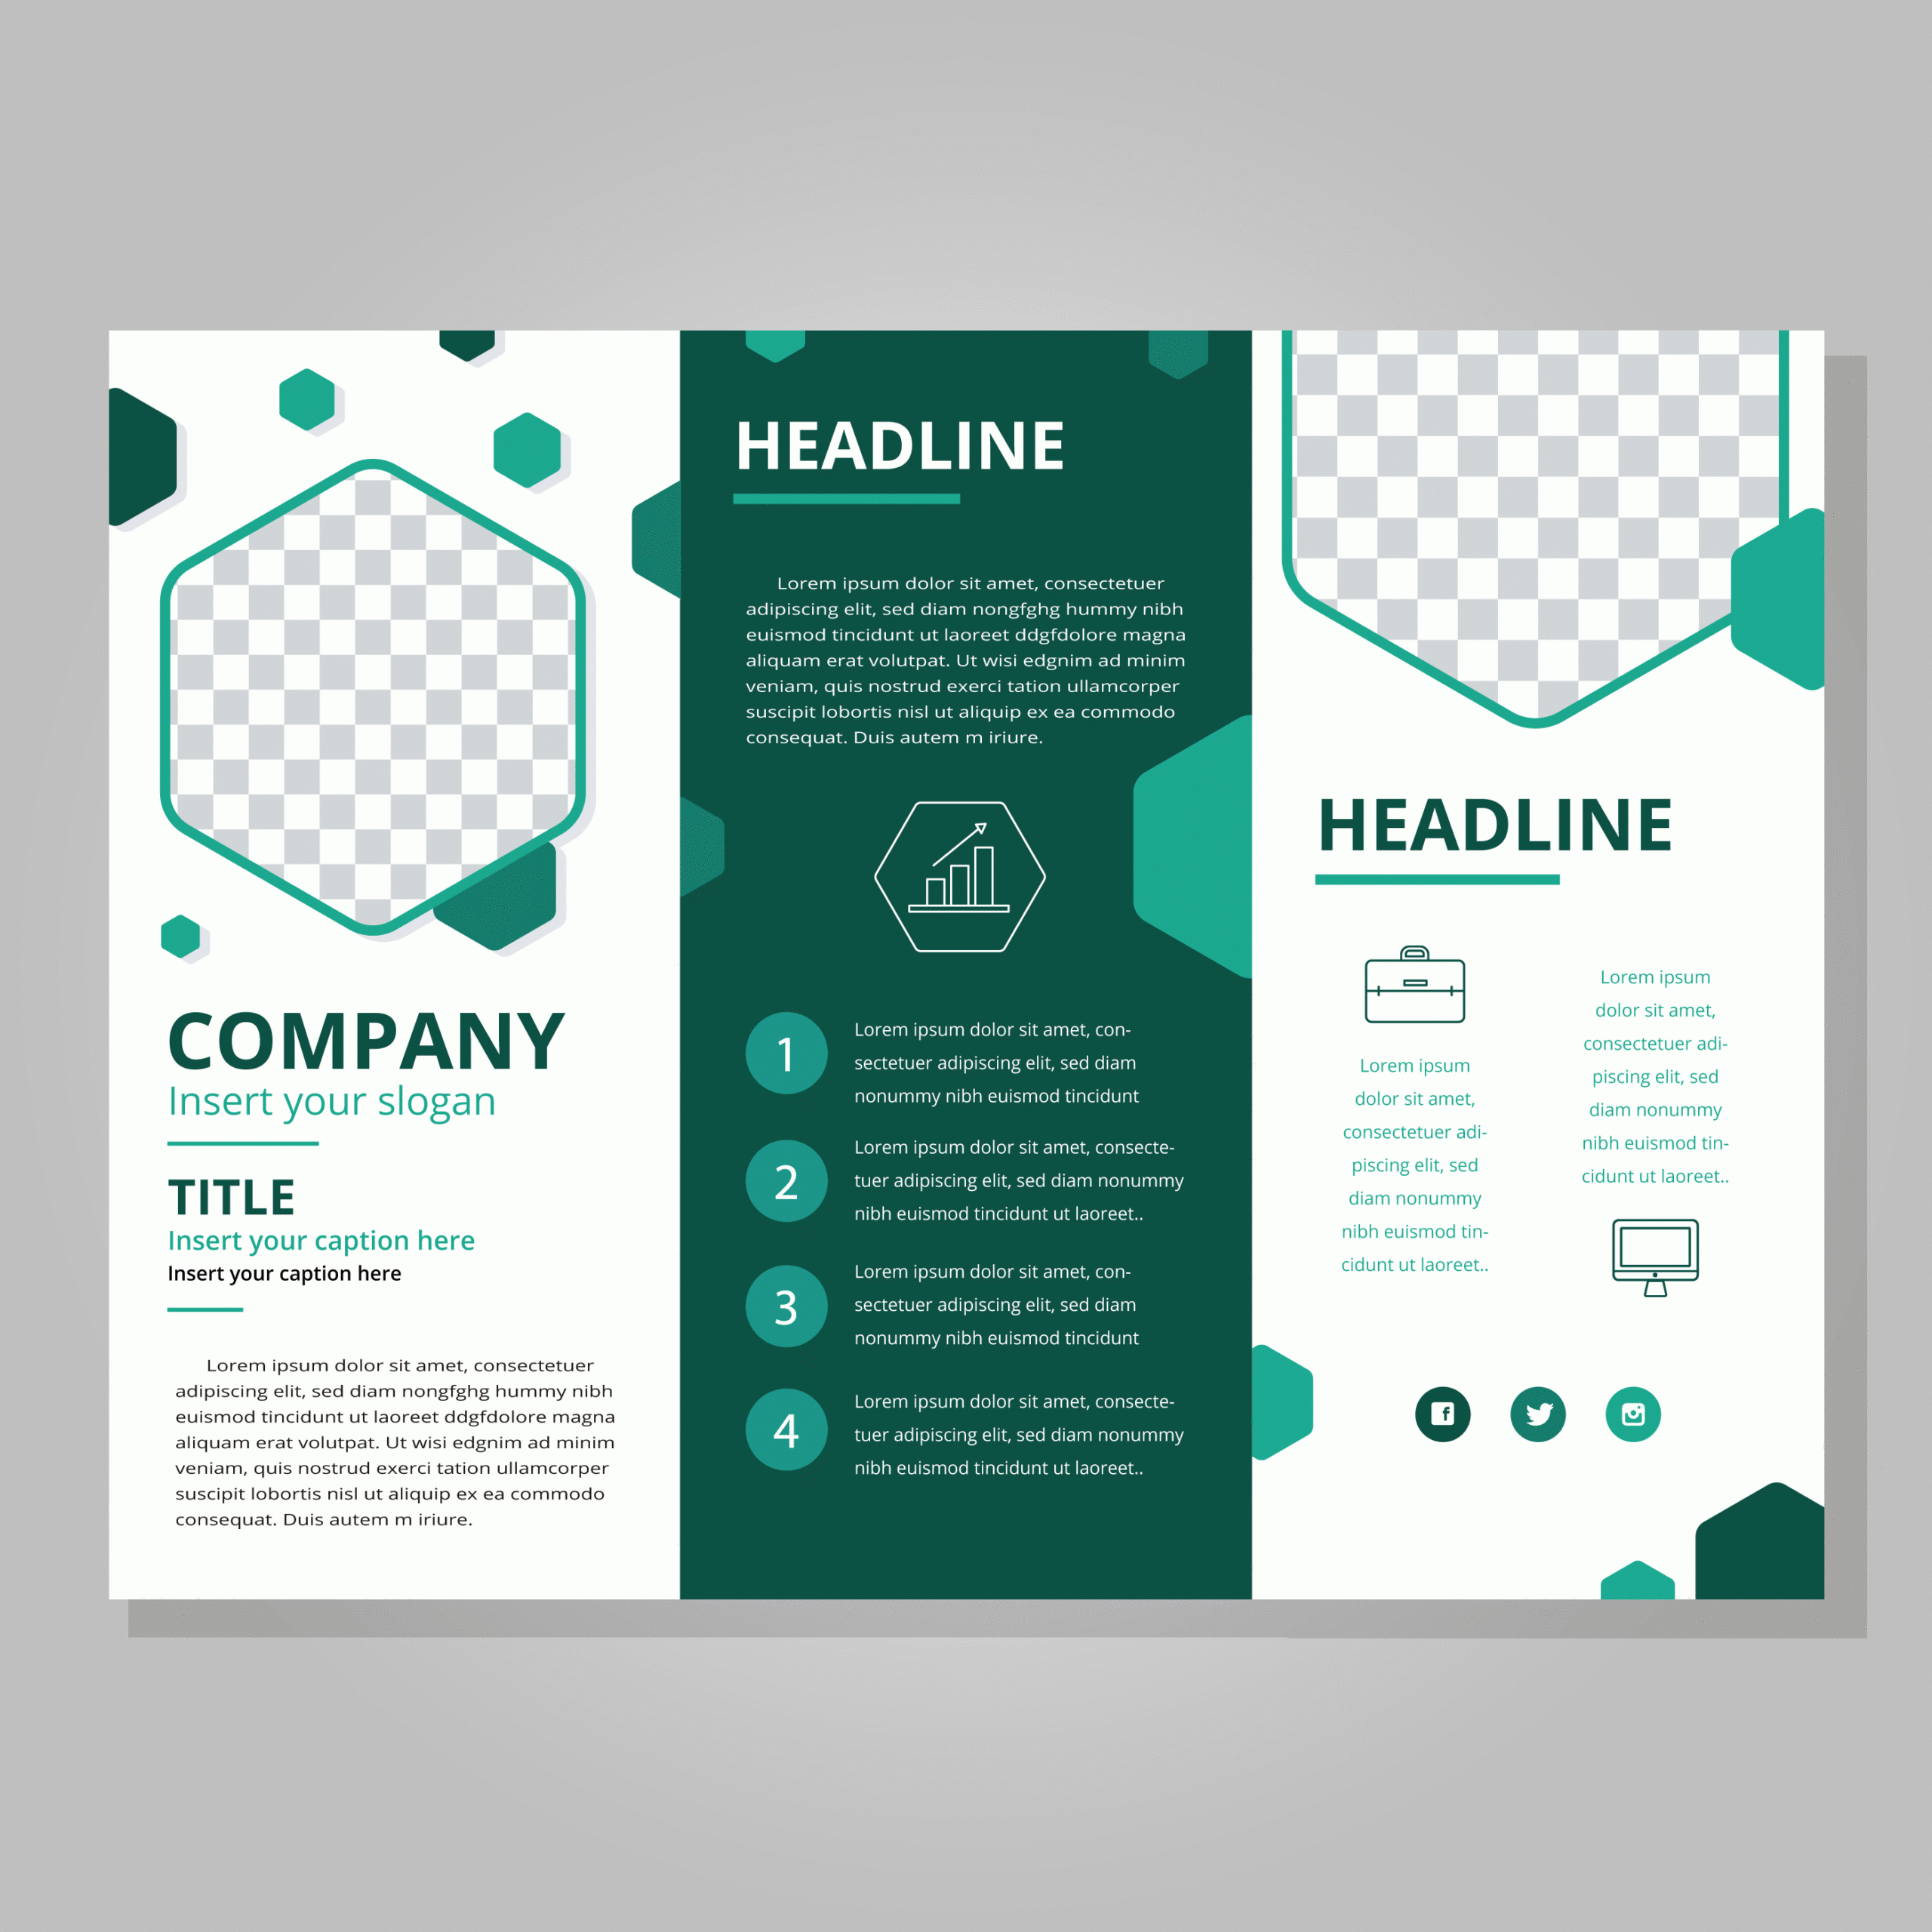 Free Downloadable Tri Fold Brochure Template - Dalep With Regard To Tri Fold Brochure Template Indesign Free Download